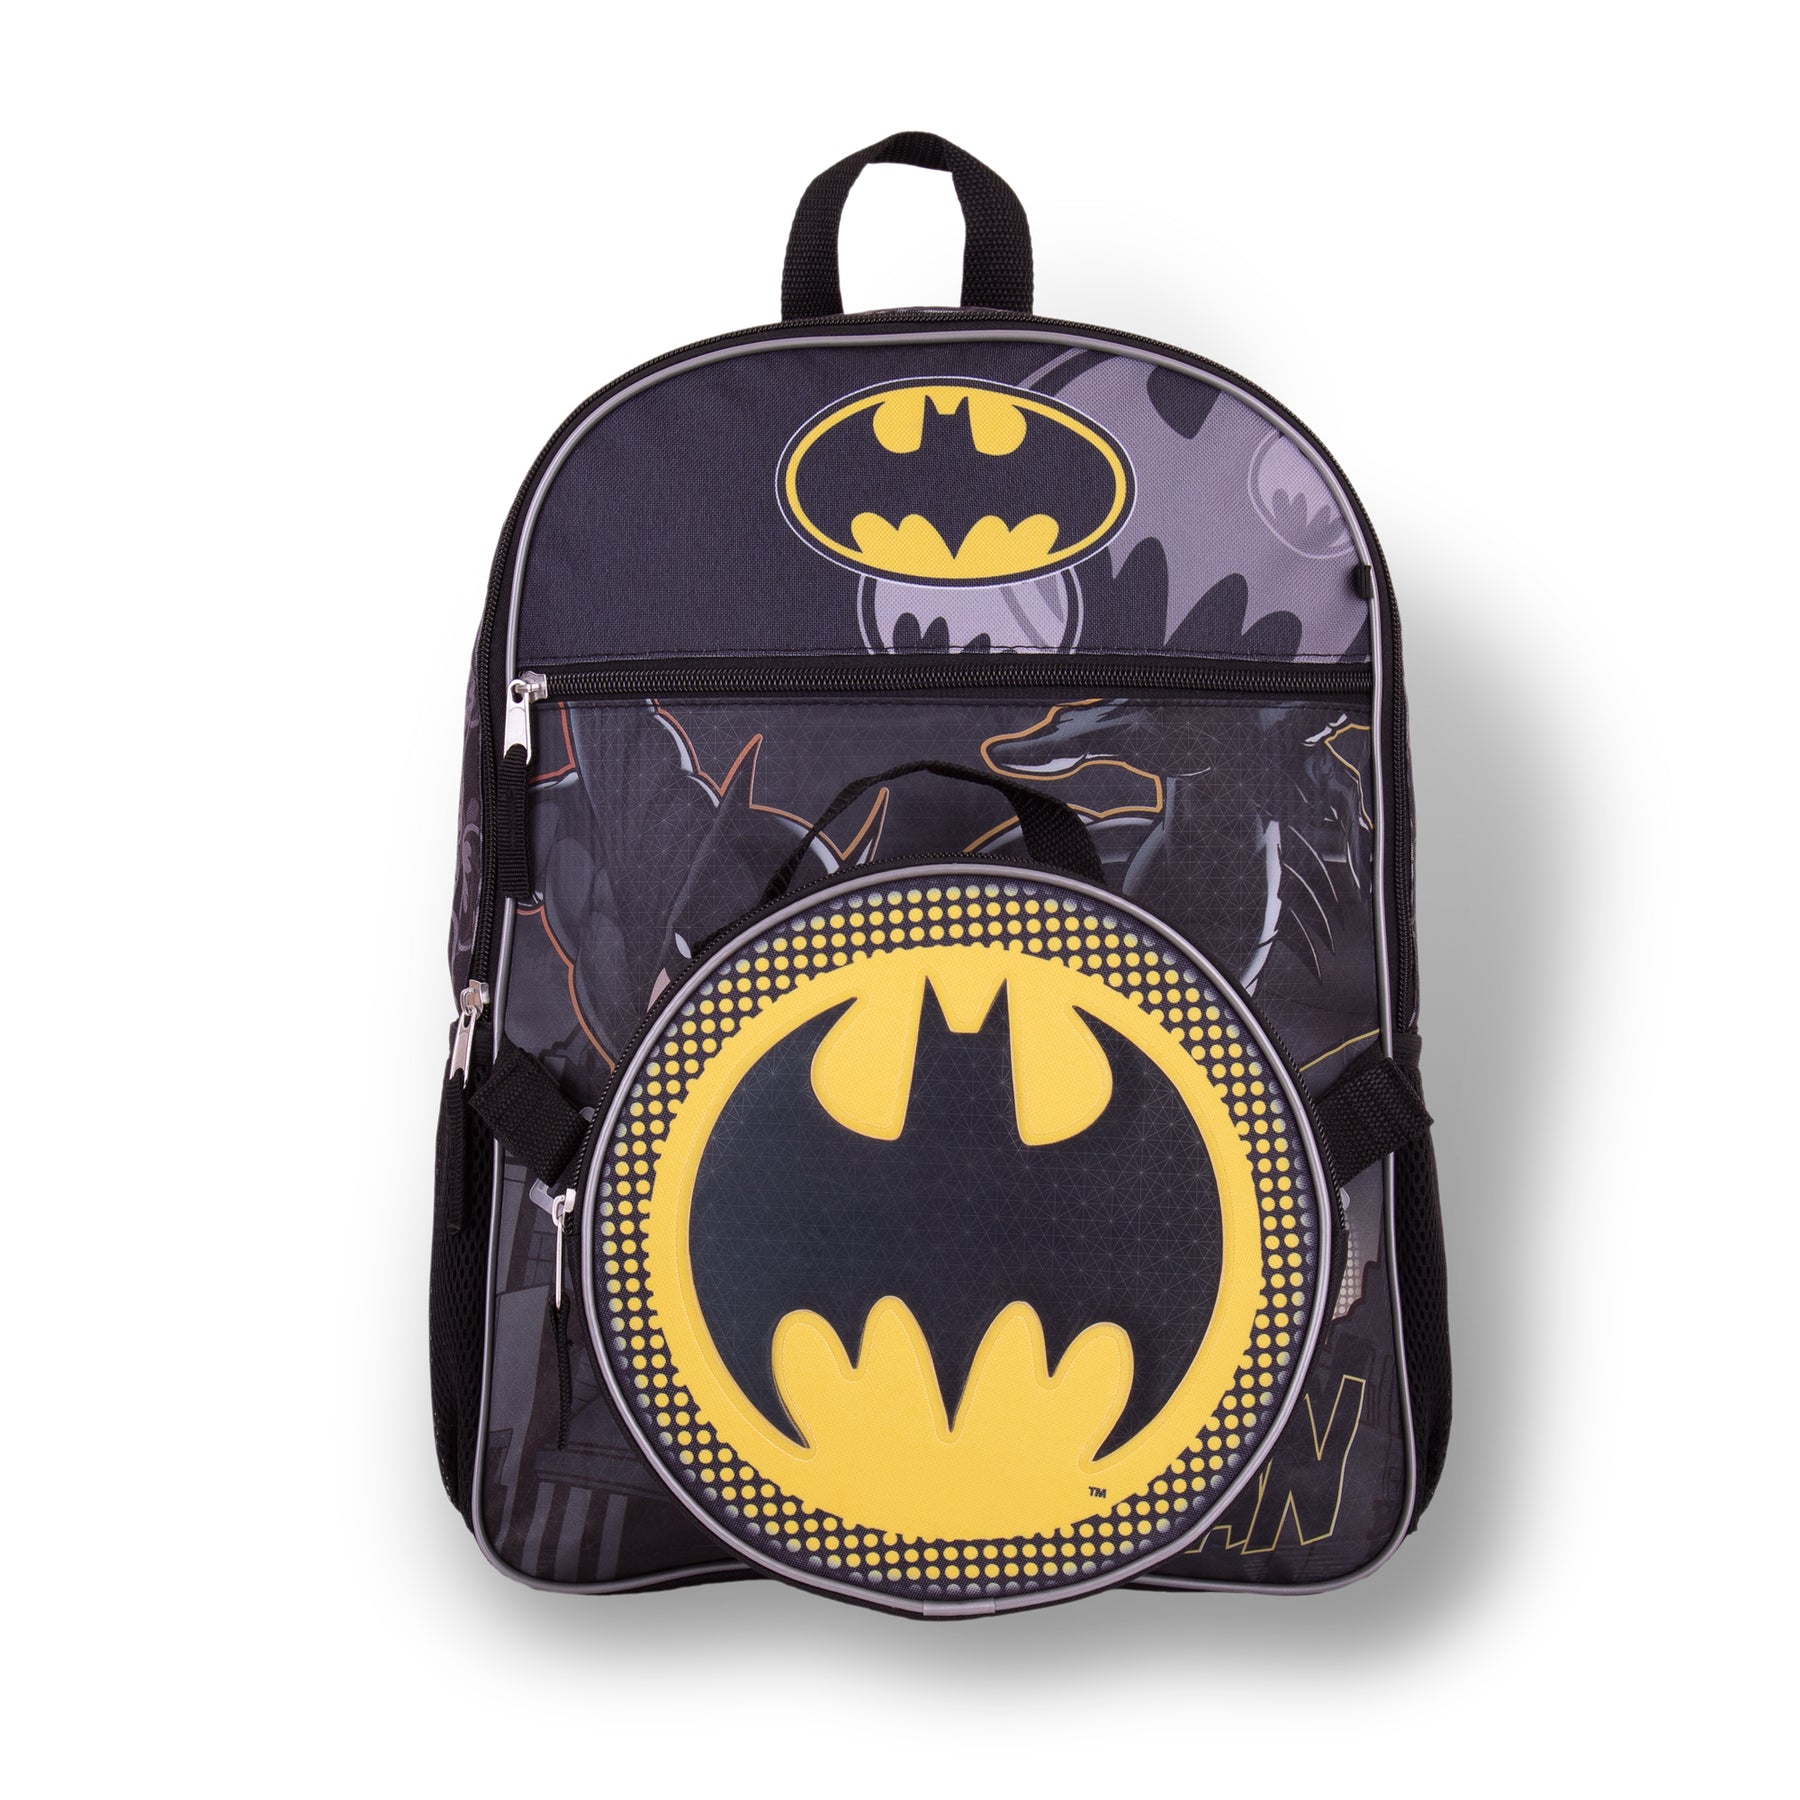 Batman Backpack With Lunch Bag Kids Back To School 4 Piece Set